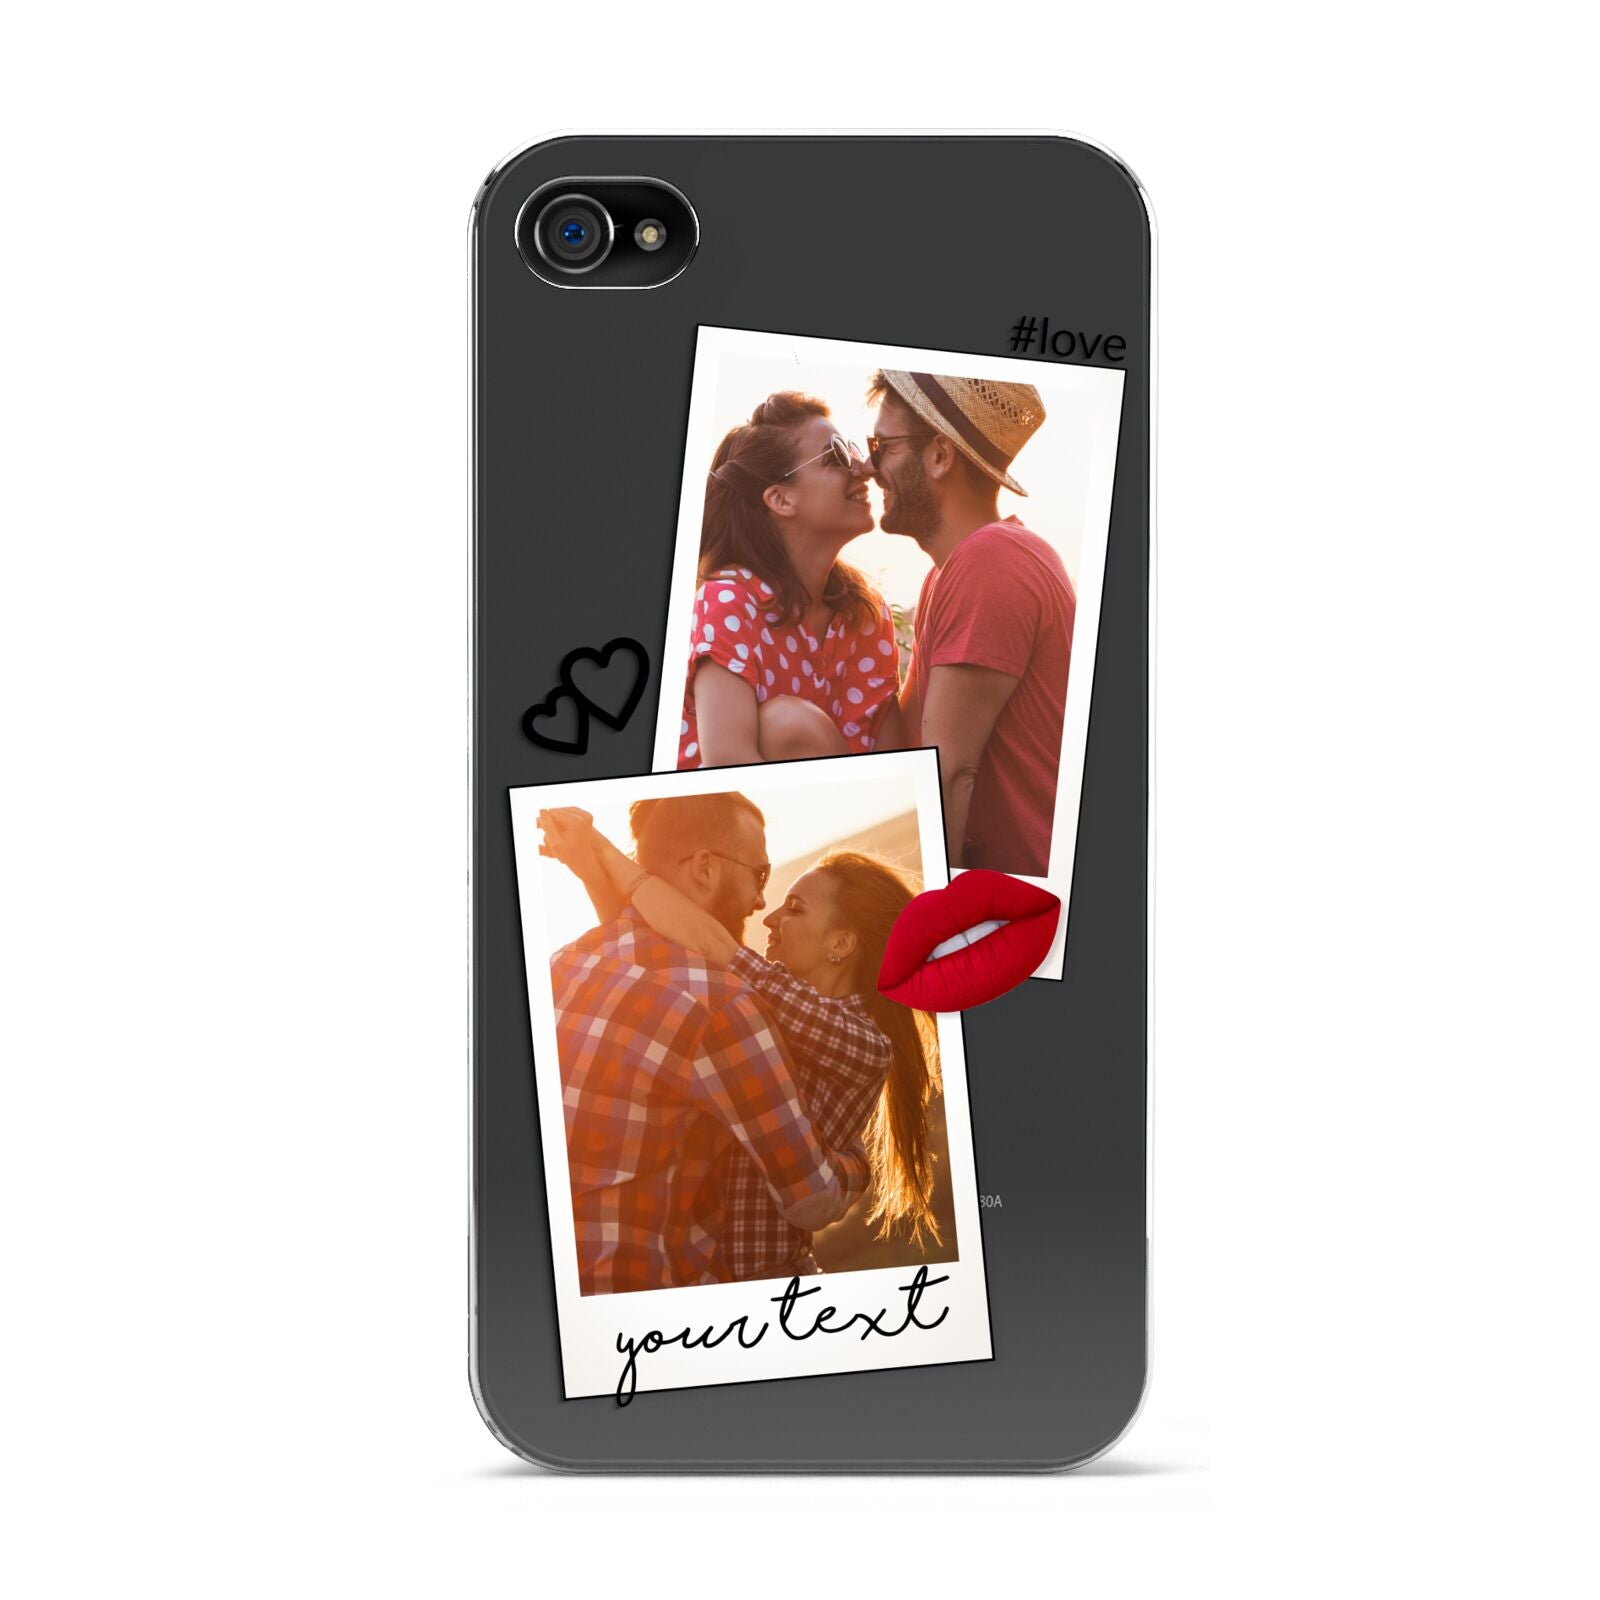 Romantic Pinboard Photo Montage Upload with Text Apple iPhone 4s Case